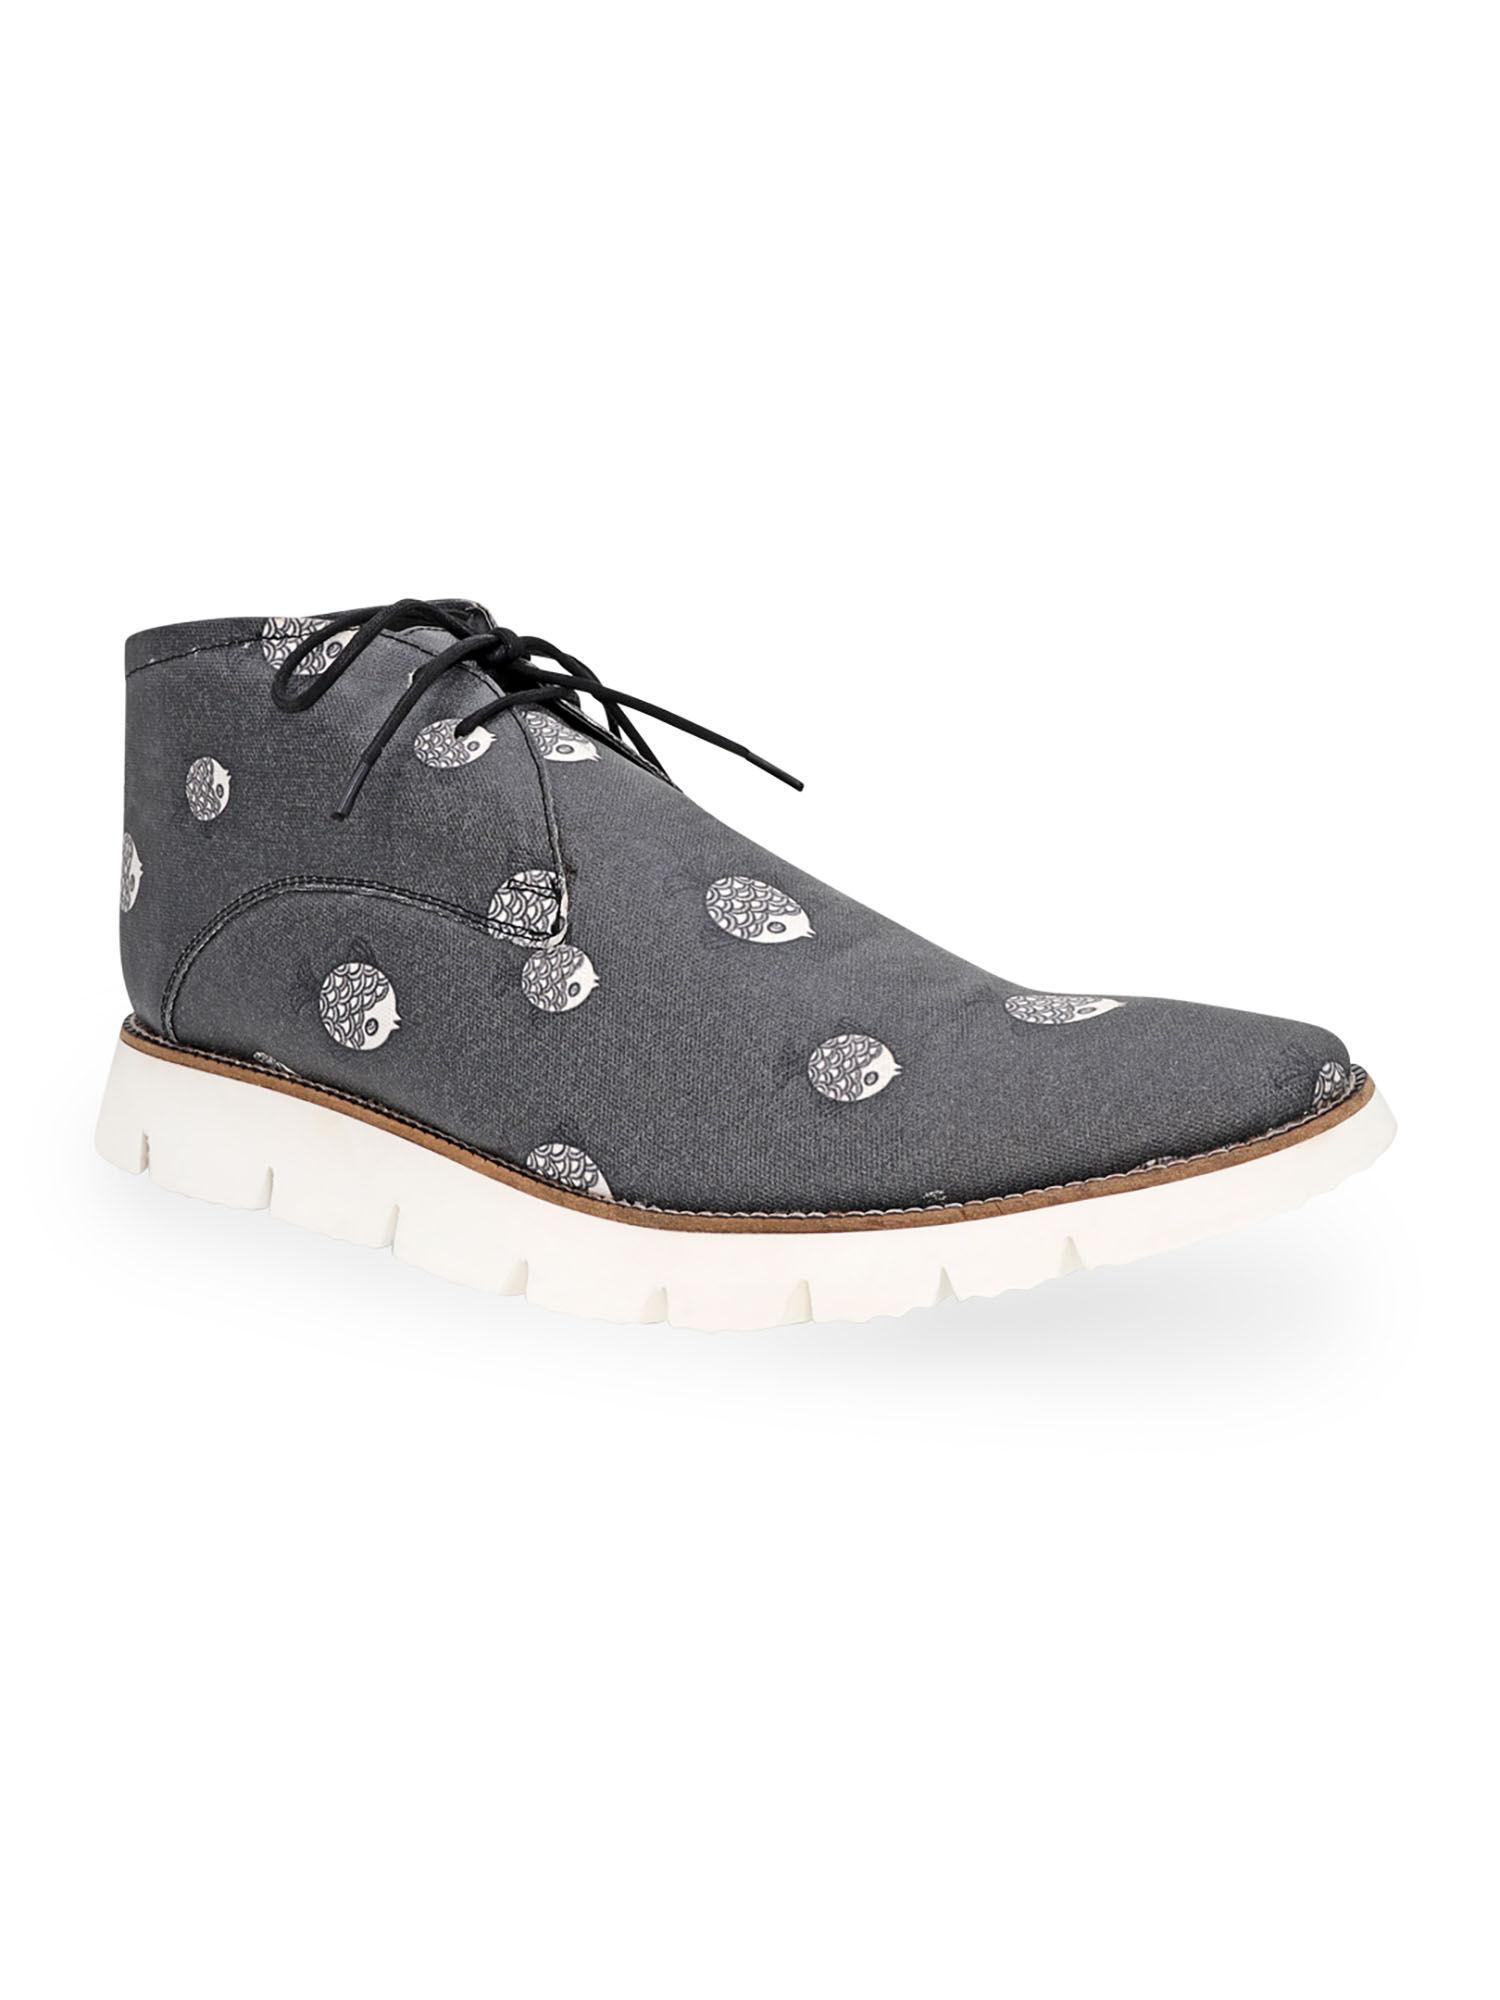 men-moonlight-lace-up-casual-derby-boots